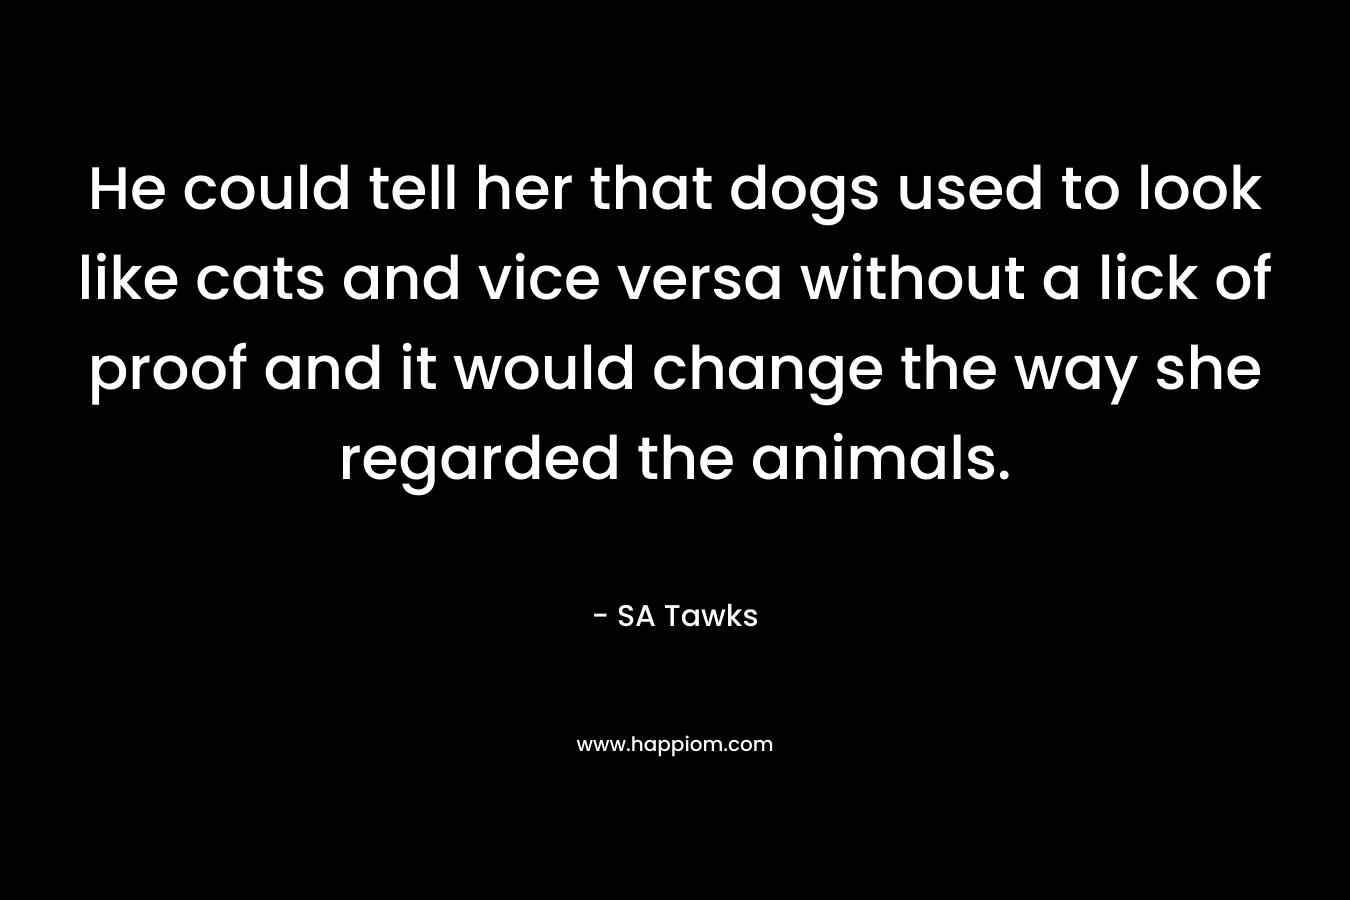 He could tell her that dogs used to look like cats and vice versa without a lick of proof and it would change the way she regarded the animals. – SA Tawks